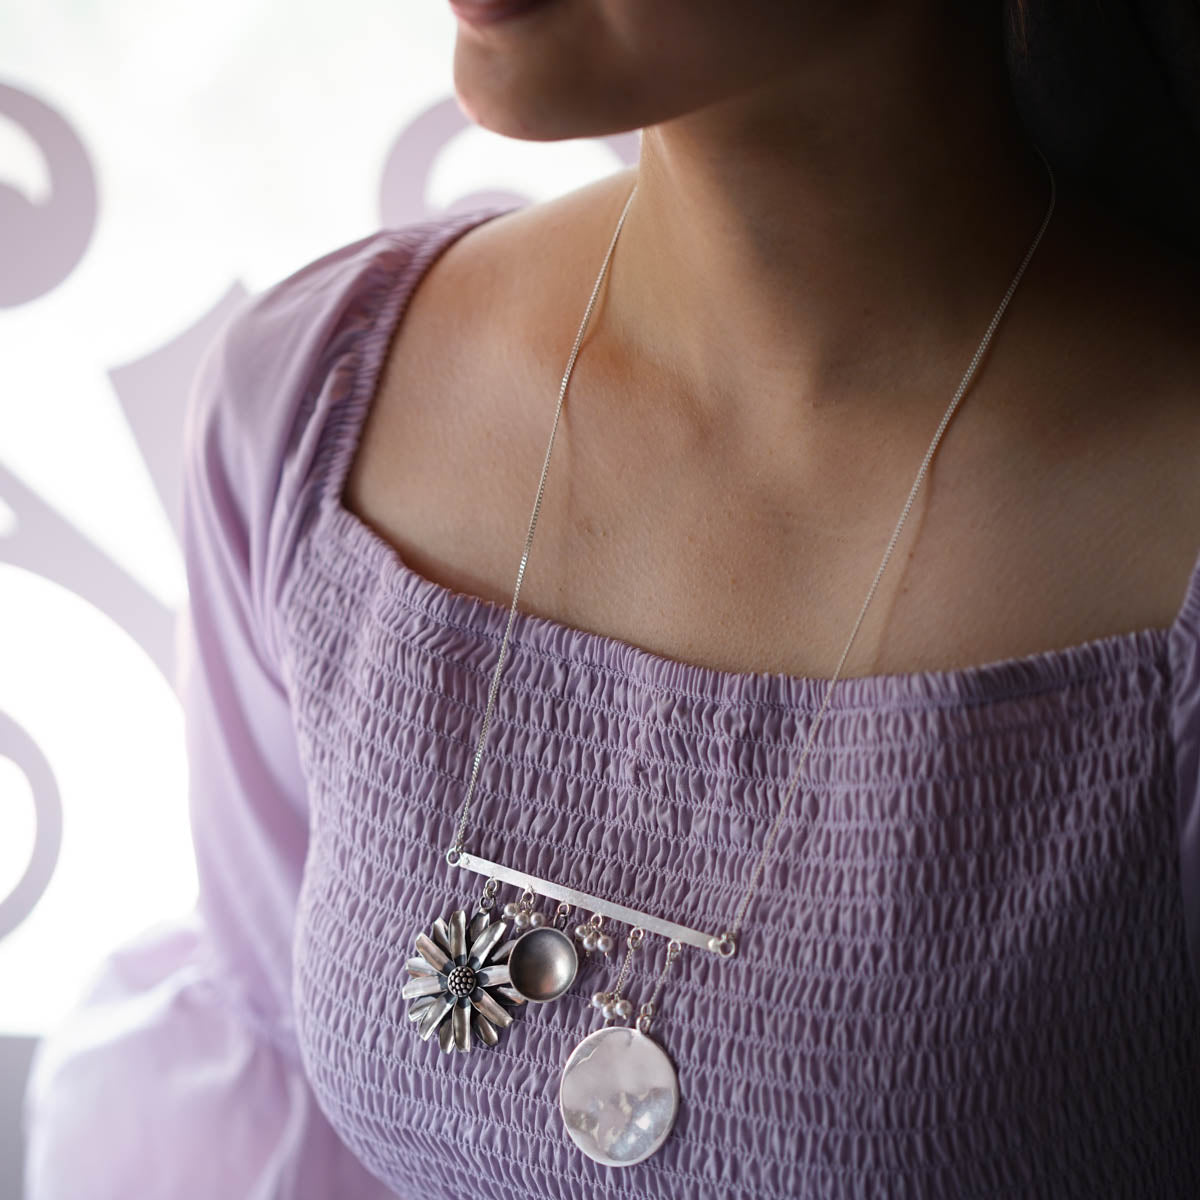 a woman wearing a purple top and a silver necklace